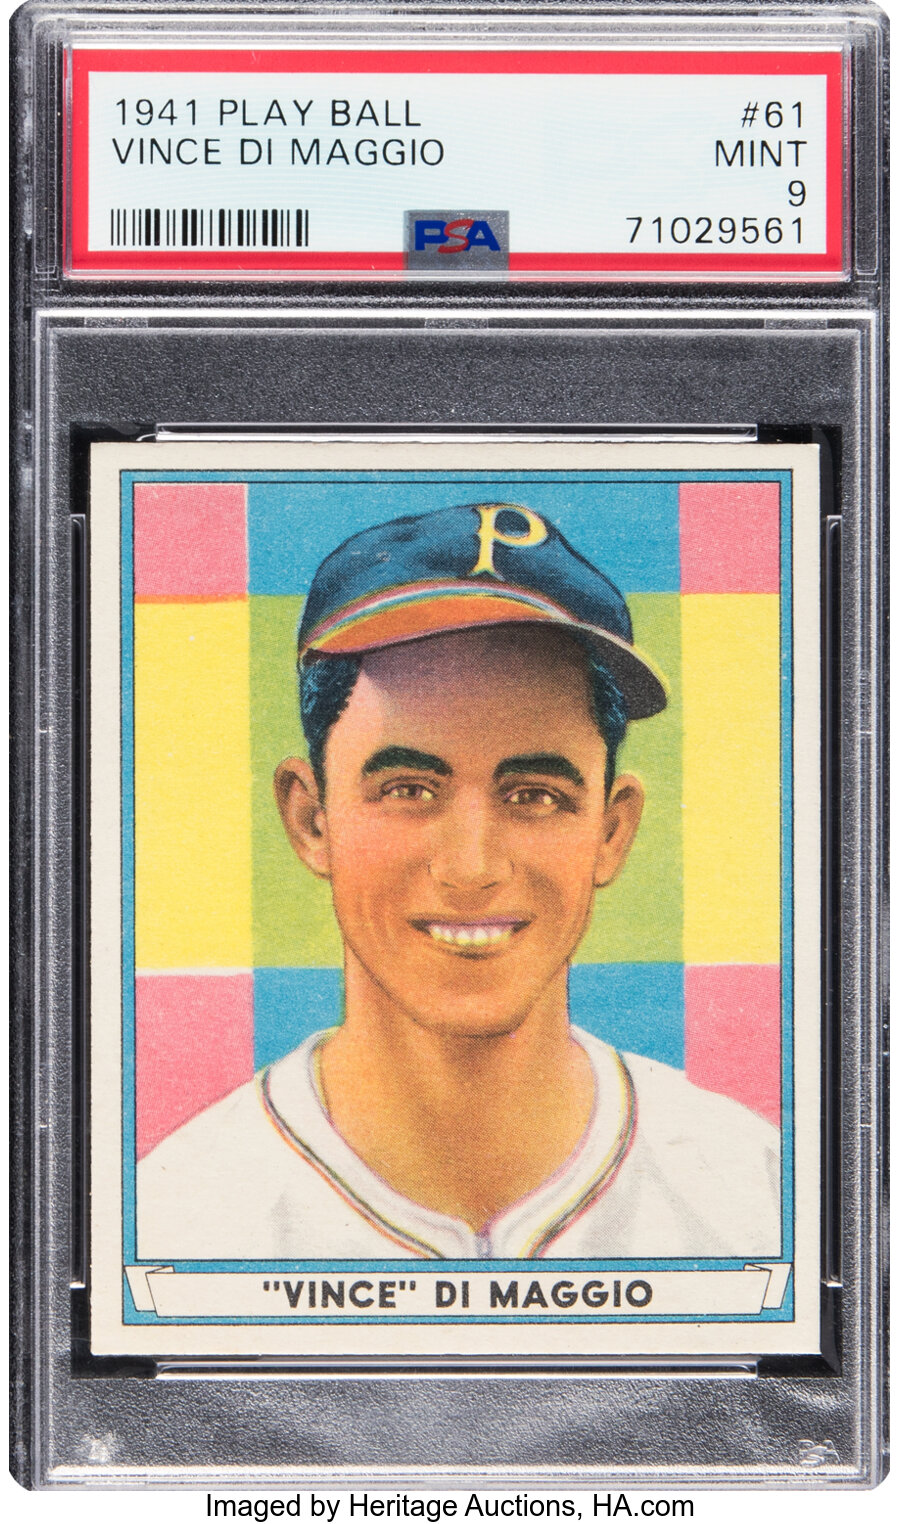 1941 Play Ball Vince DiMaggio Rookie #61 PSA Mint 9 - Only One Higher!